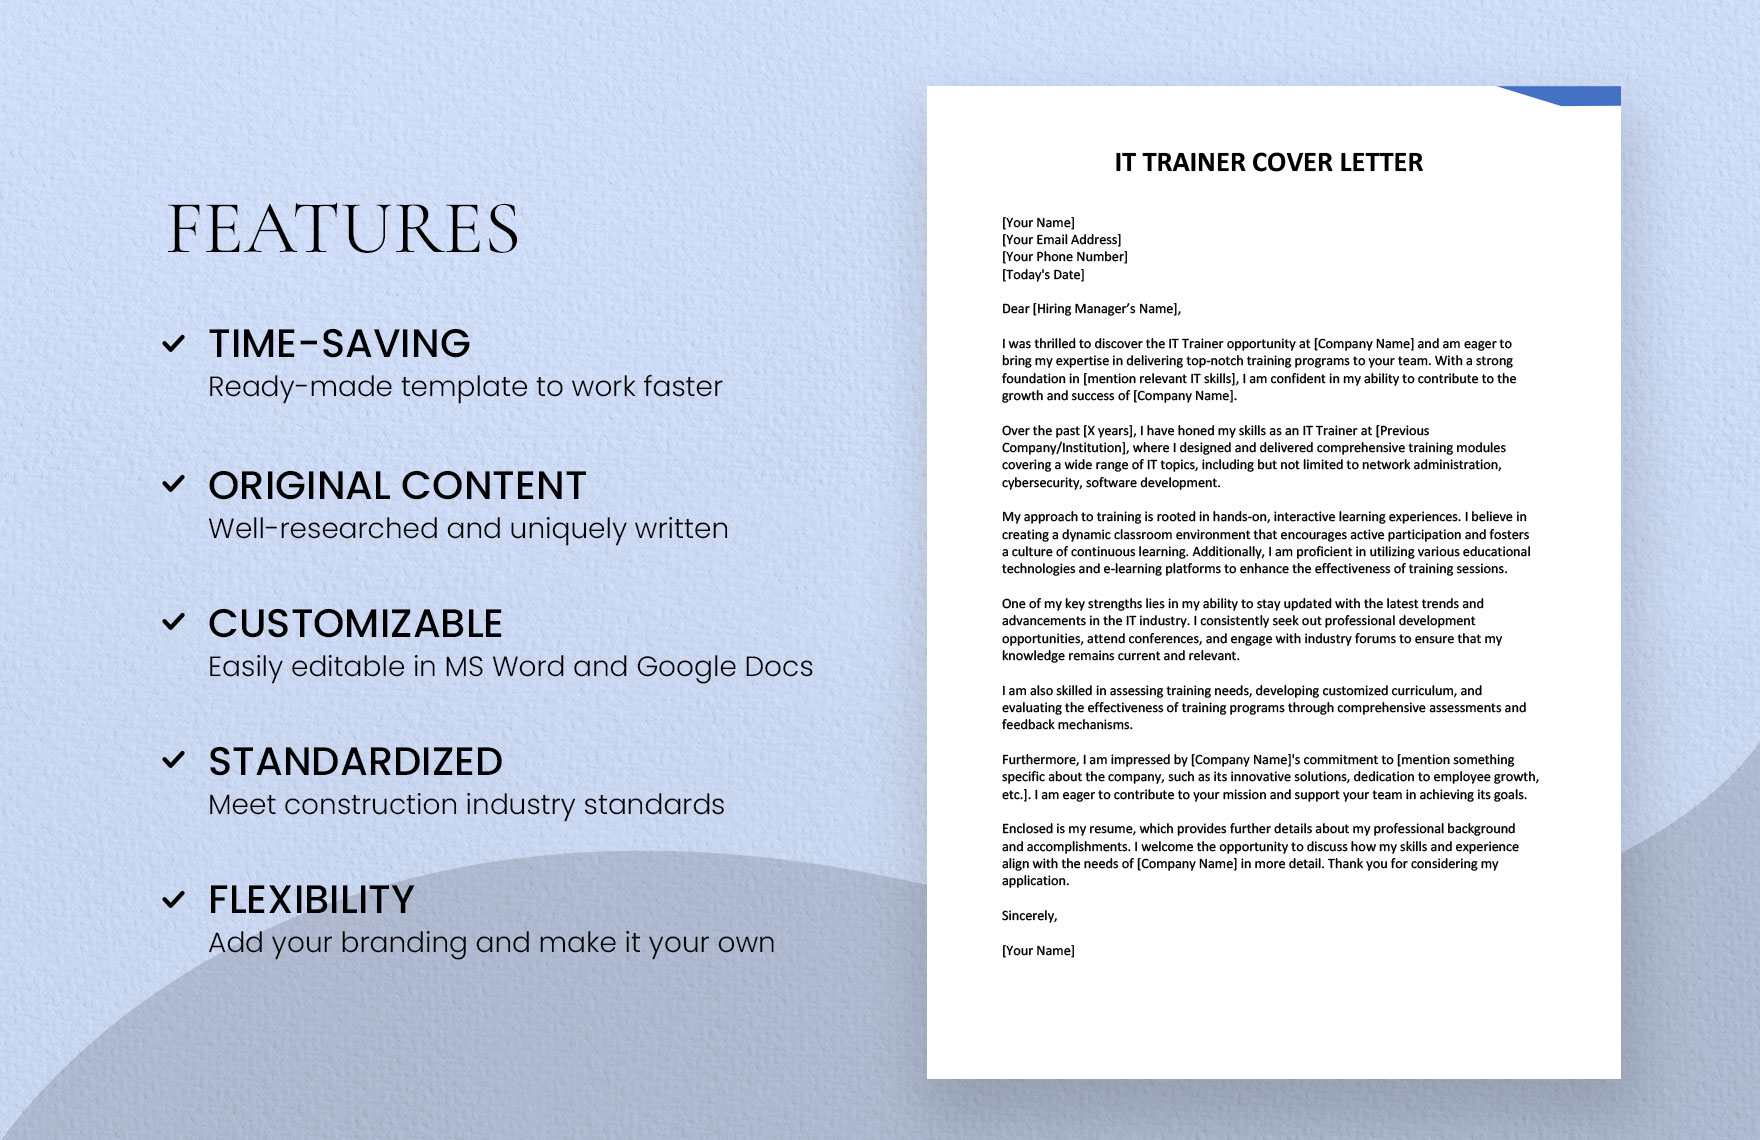 IT Trainer Cover Letter